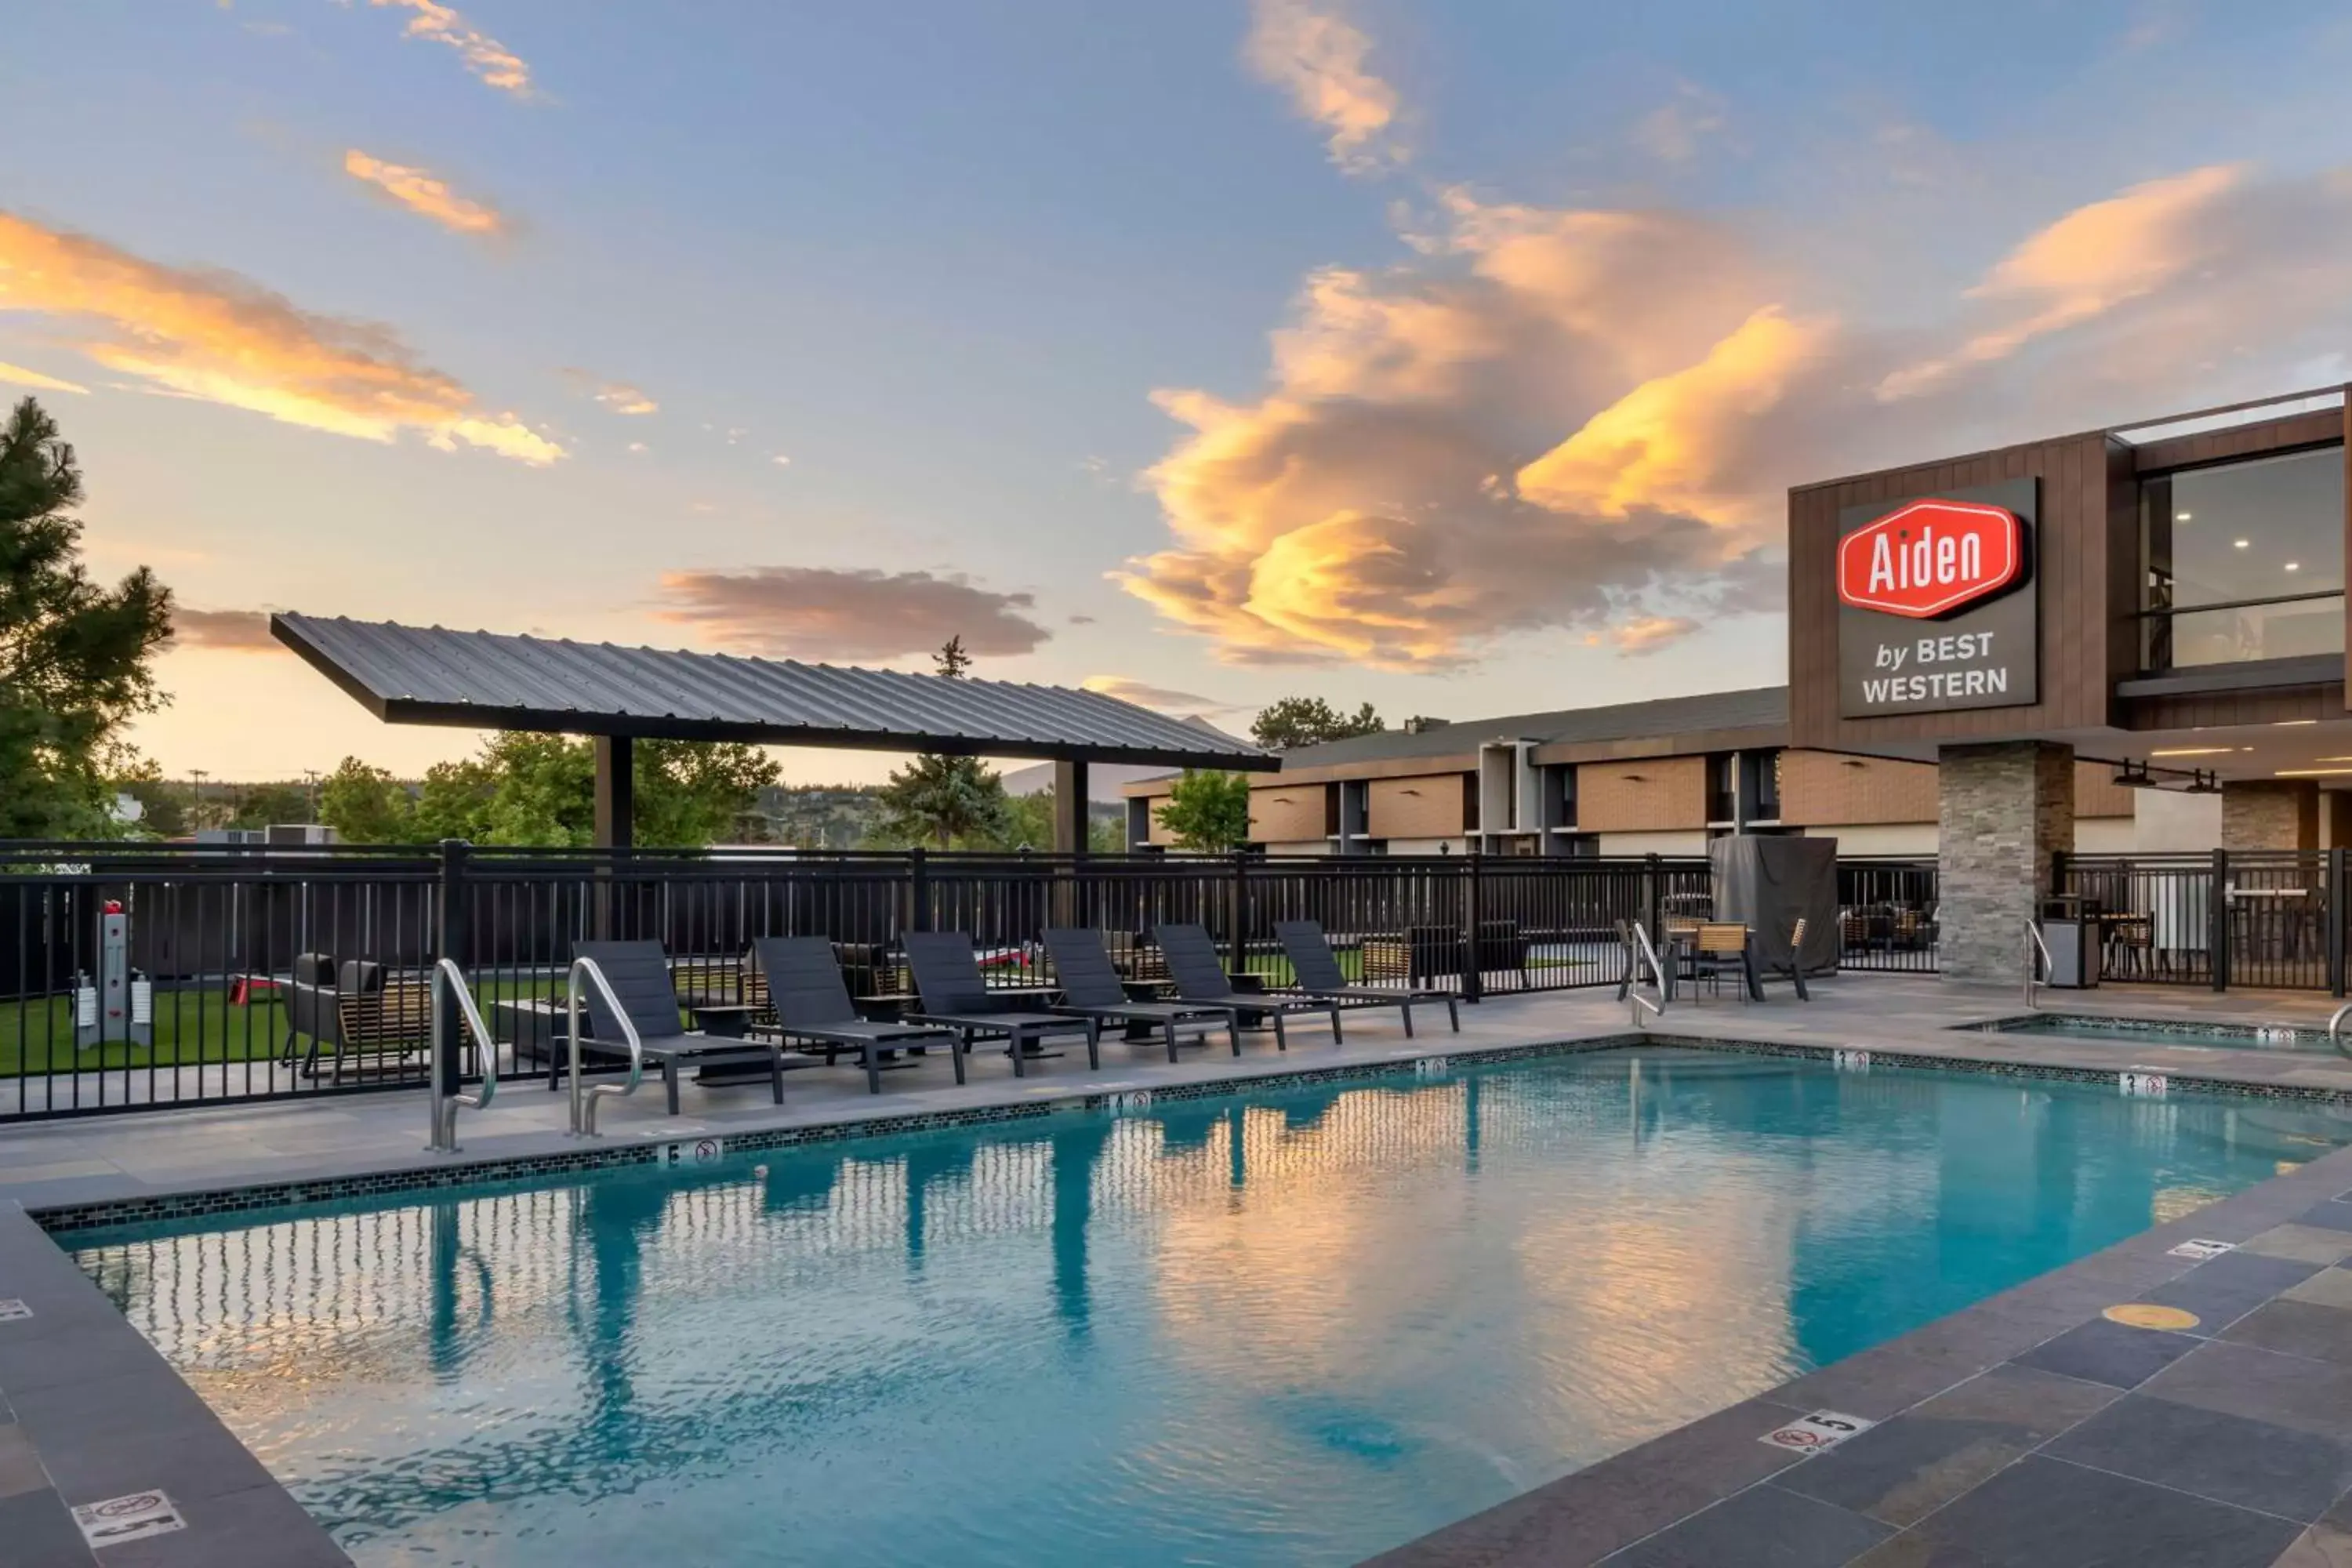 Property building, Swimming Pool in Aiden by Best Western Flagstaff